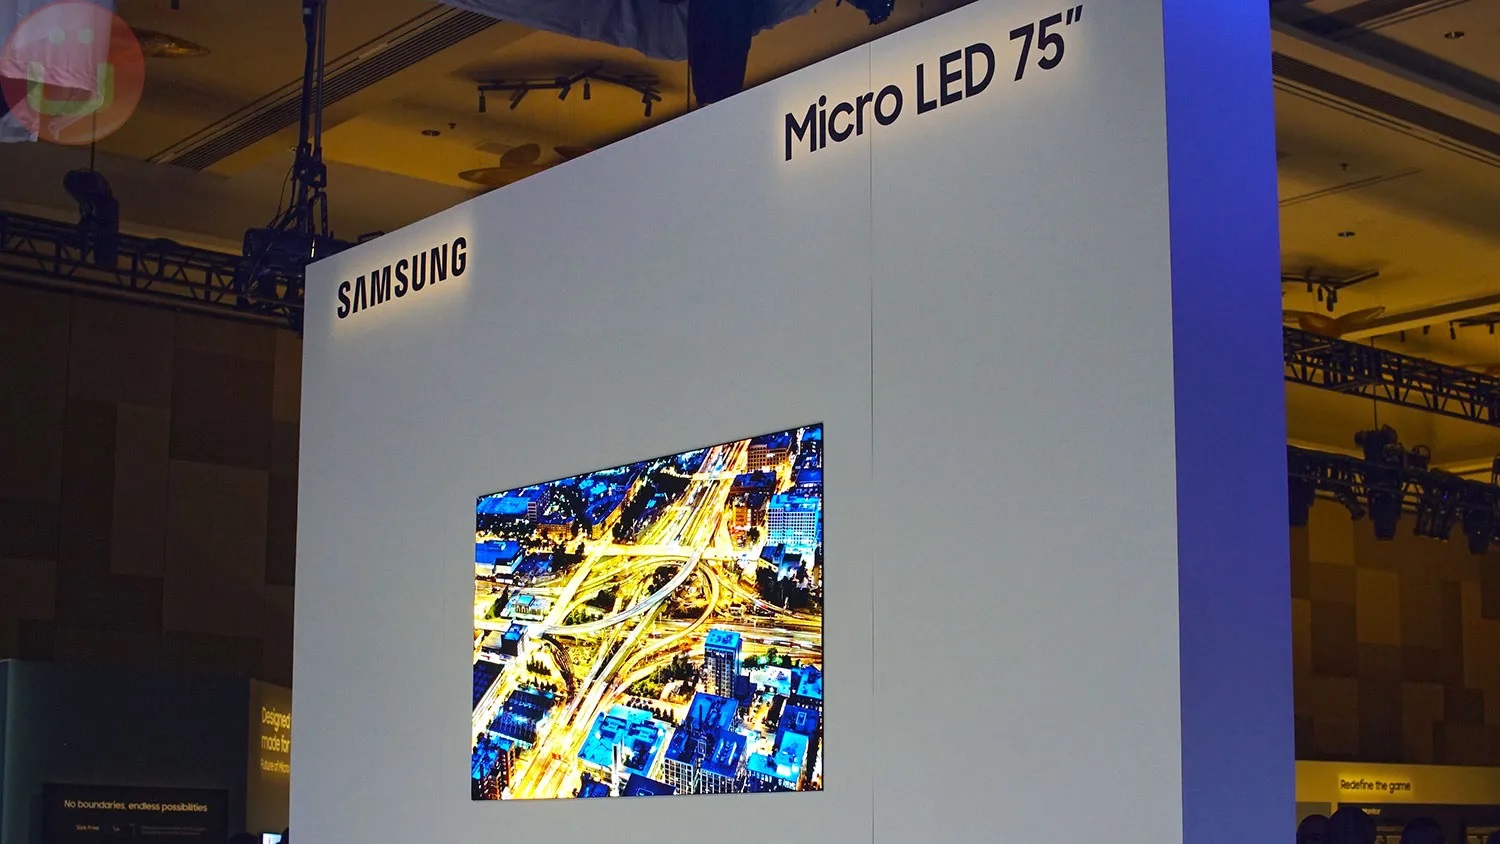 Samsung says it will take another 3-4 years for Micro OLED displays to hit the market